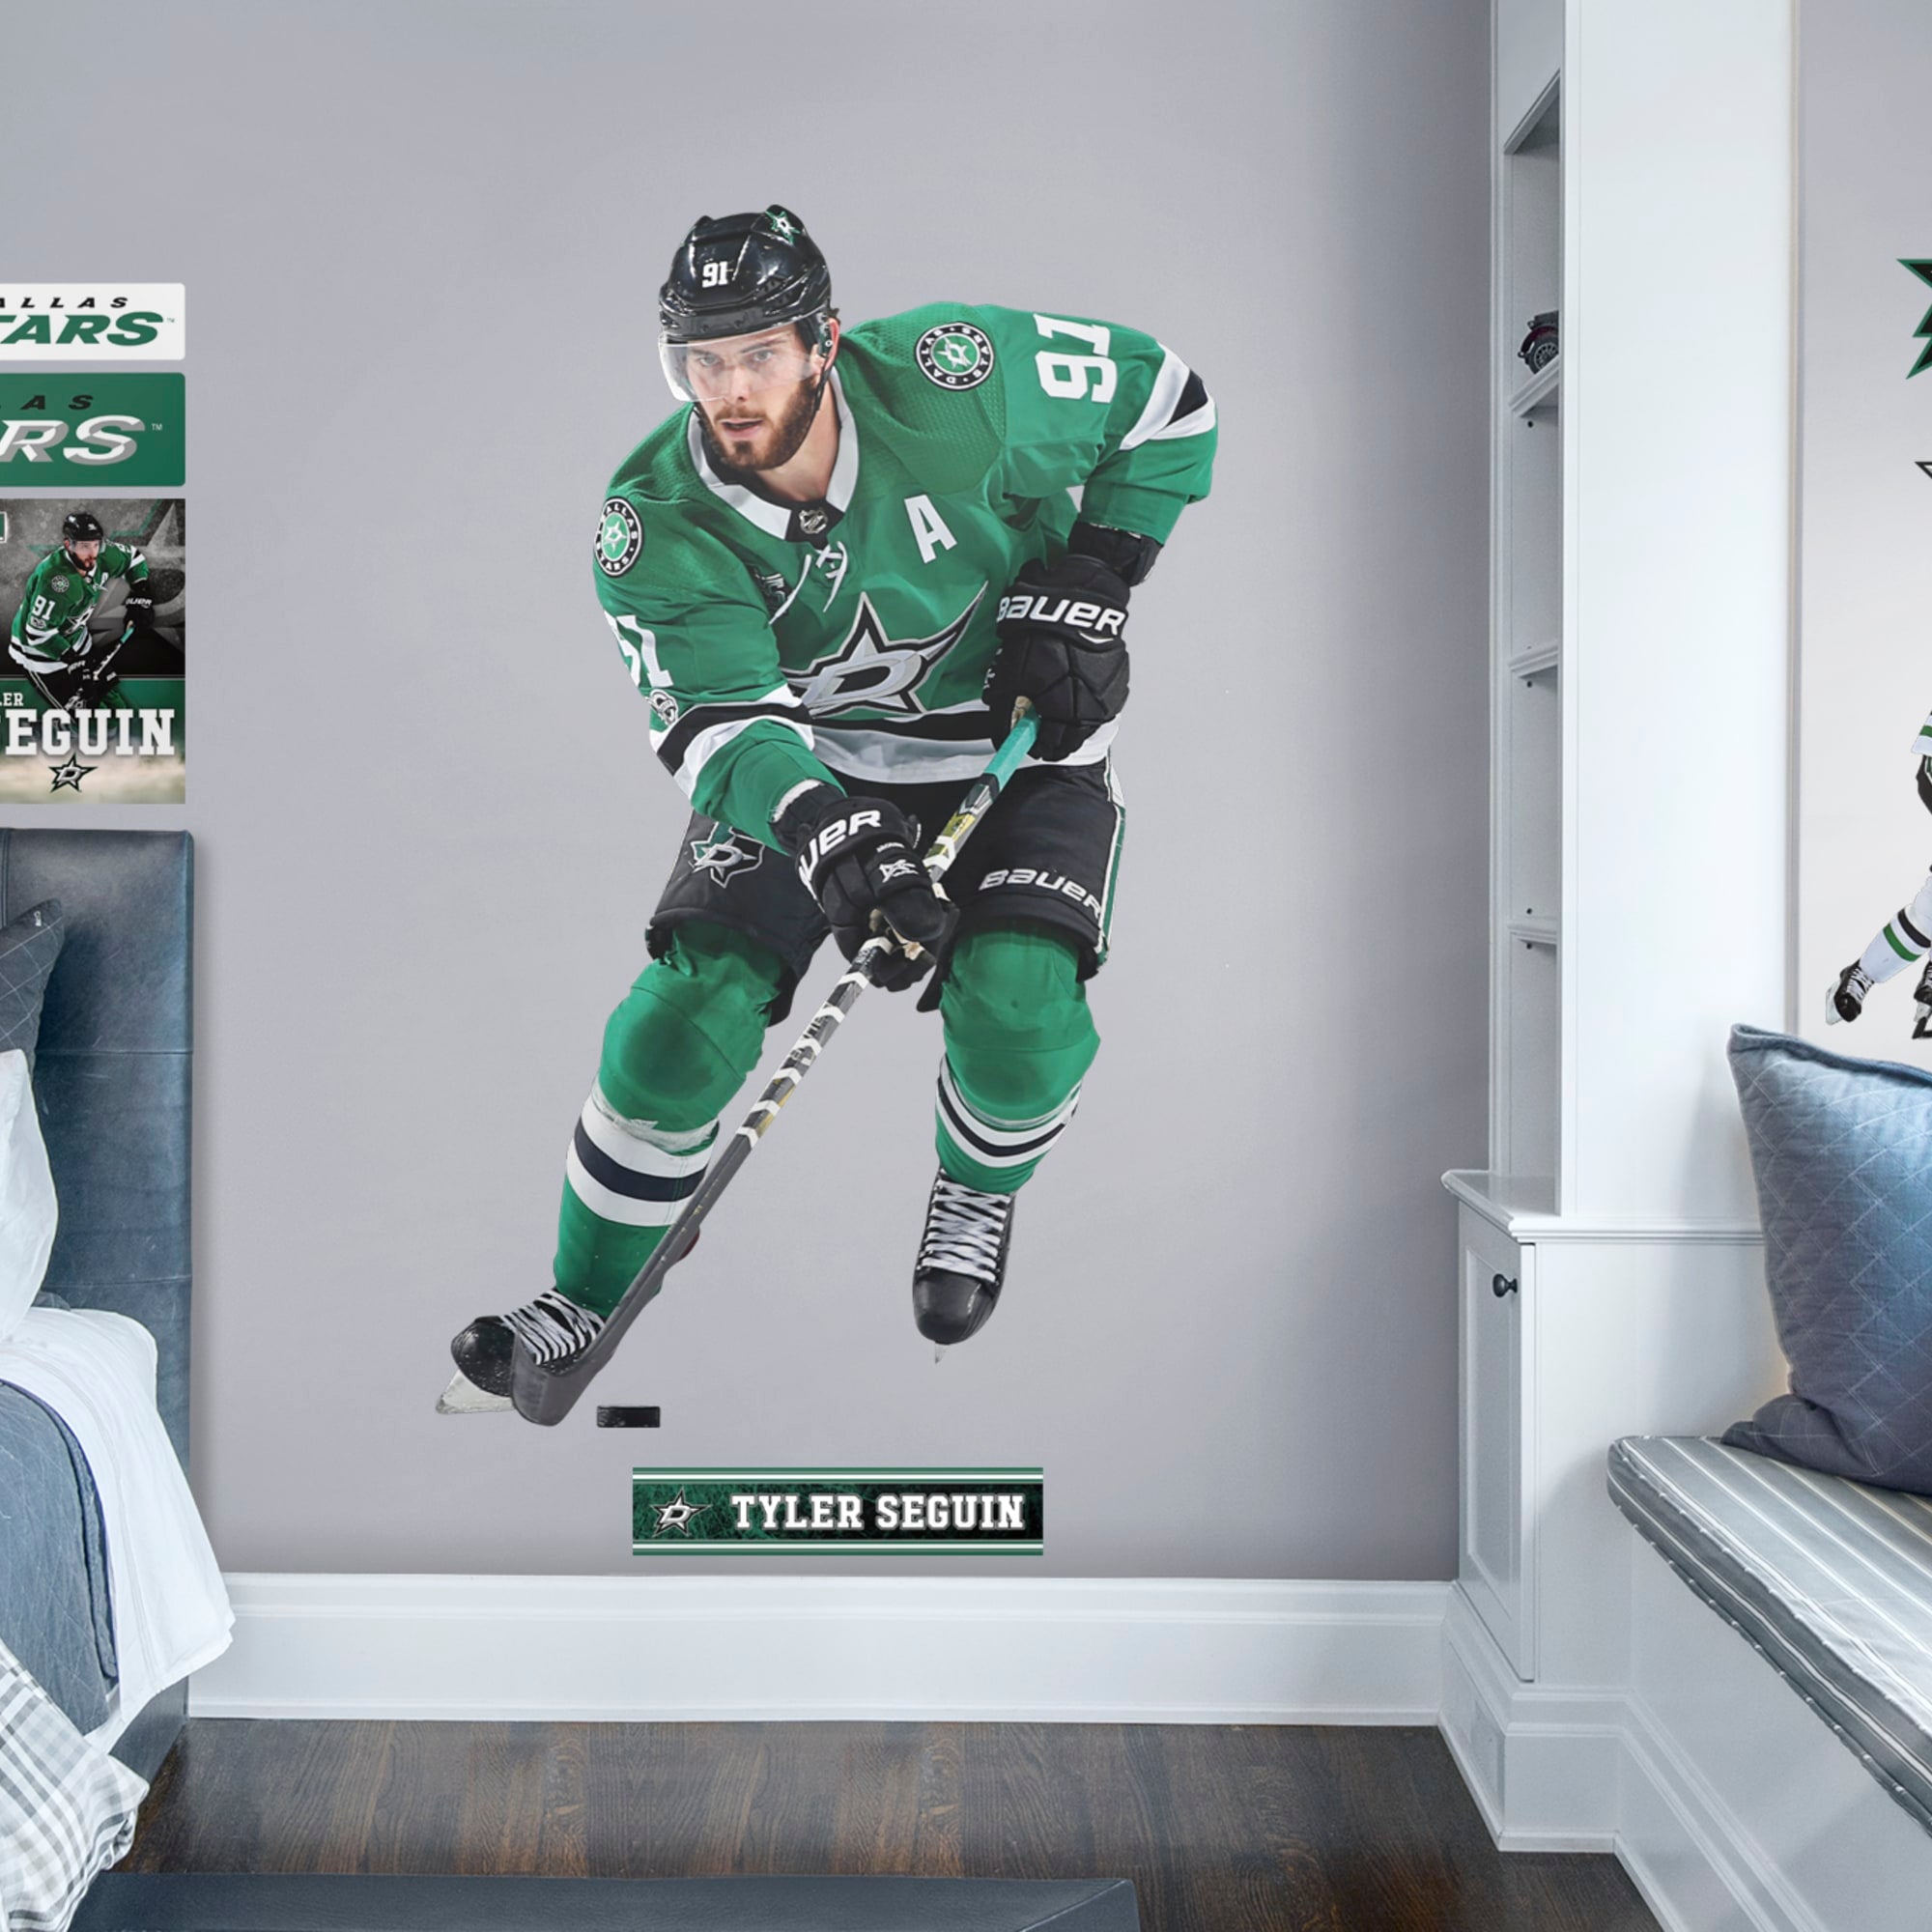 Tyler Seguin for Dallas Stars - Officially Licensed NHL Removable Wall Decal Life-Size Athlete + 9 Decals (47"W x 73"H) by Fathe